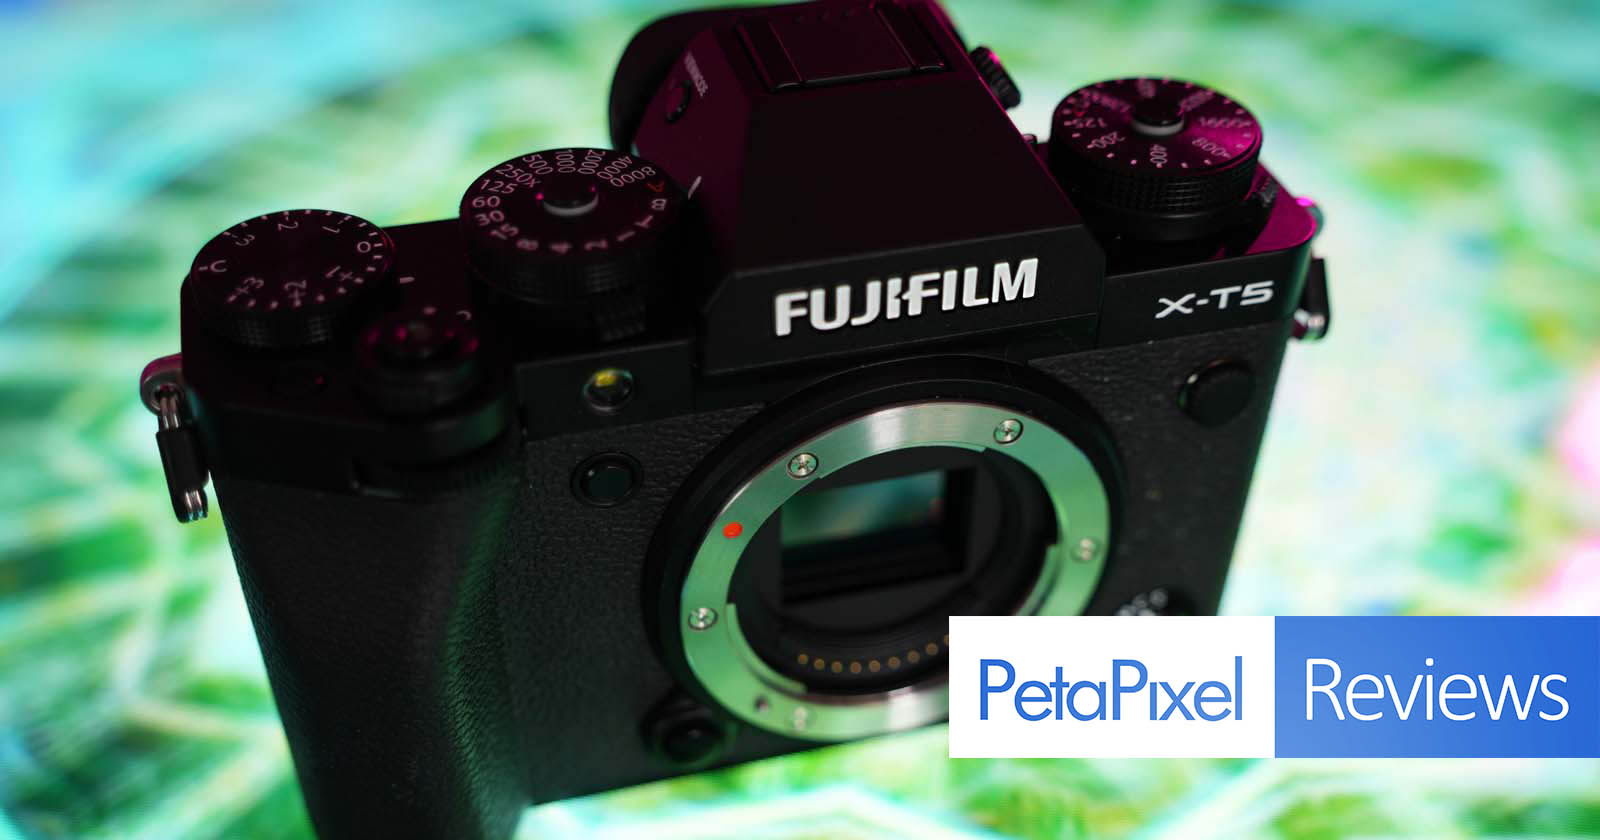 Fujifilm X-T5 Review: Compromises And Shortcomings Spoil A Great Update